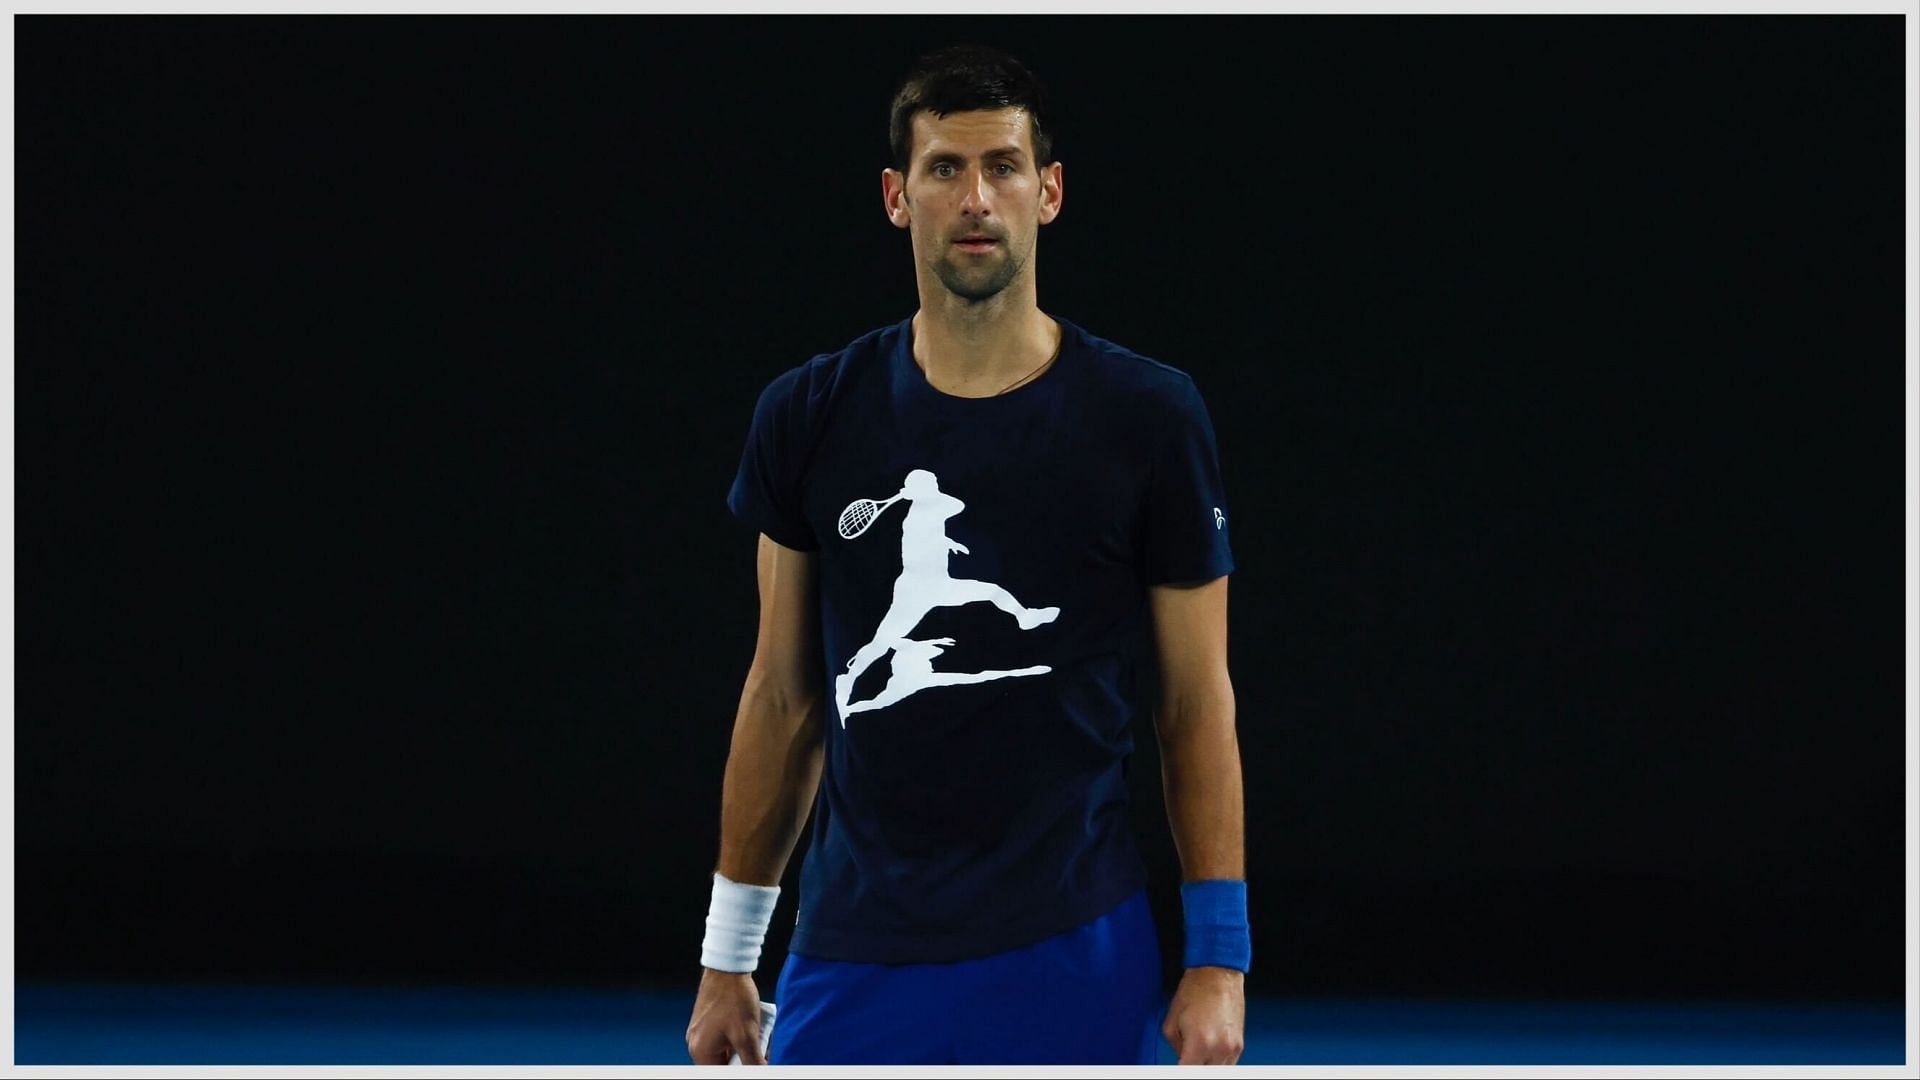 Novak Djokovic is competing for the first time at the Geneva Open